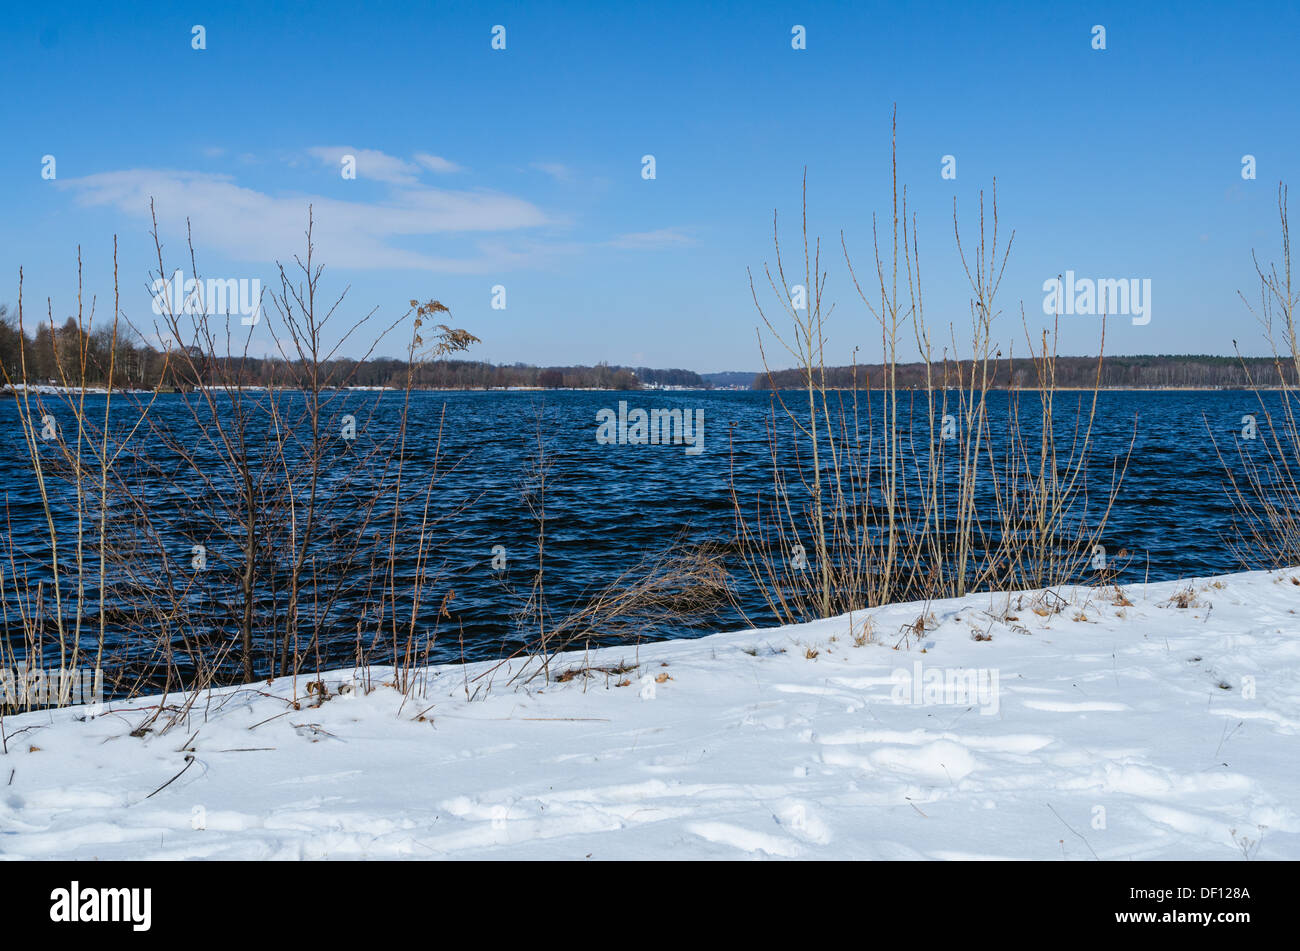 Snowy shore of Glienicke lake on Havel river in Germany Stock Photo